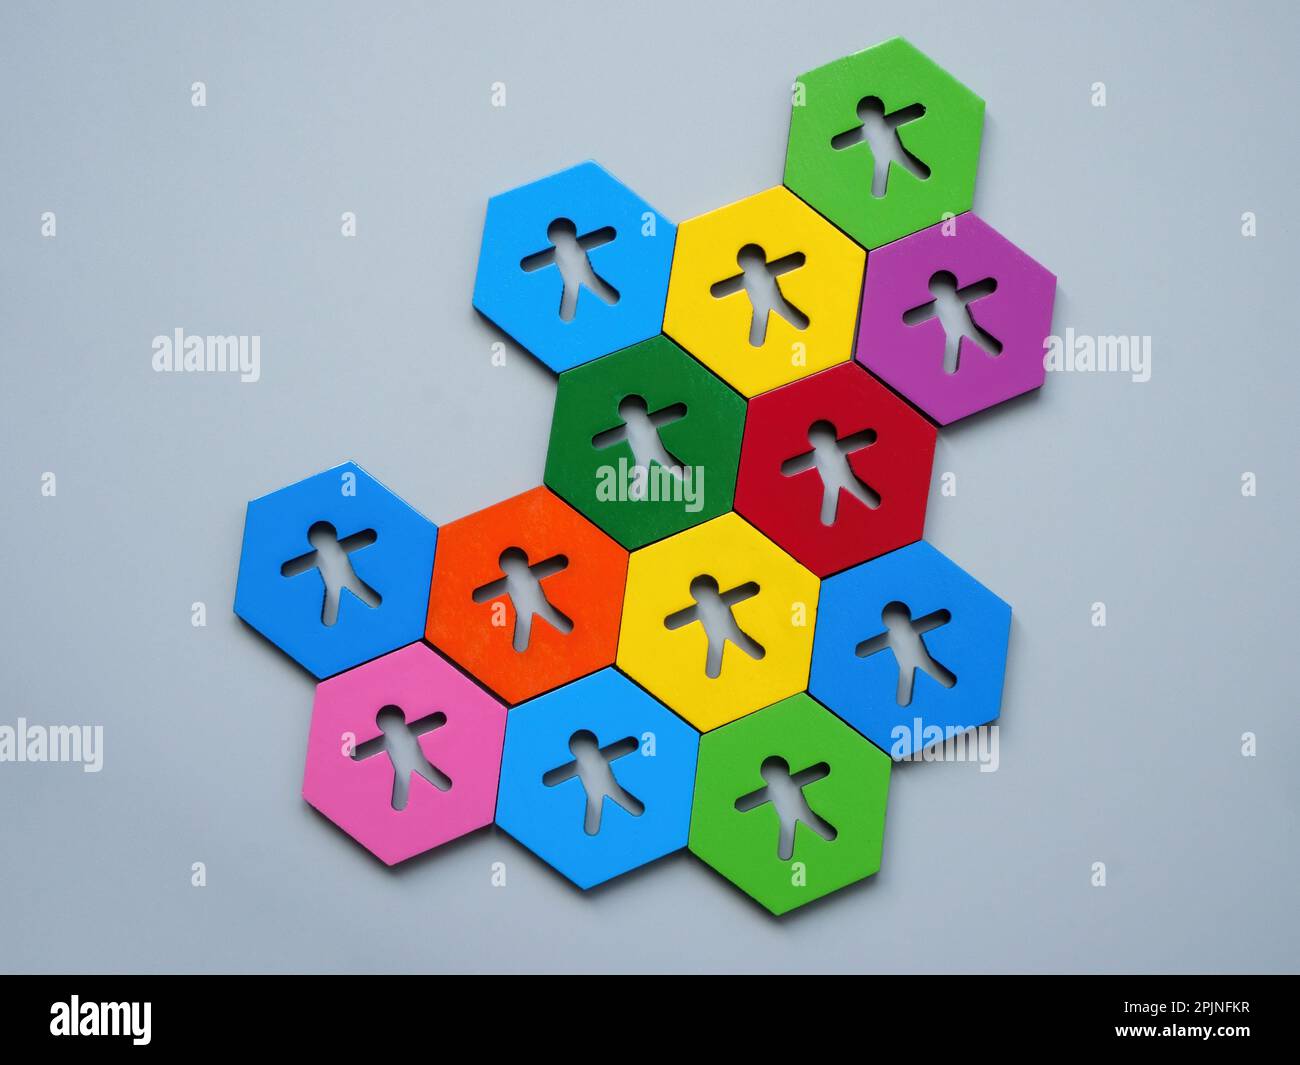 Multi-colored hexagons with figures as a symbol of unity and teambuilding. Stock Photo